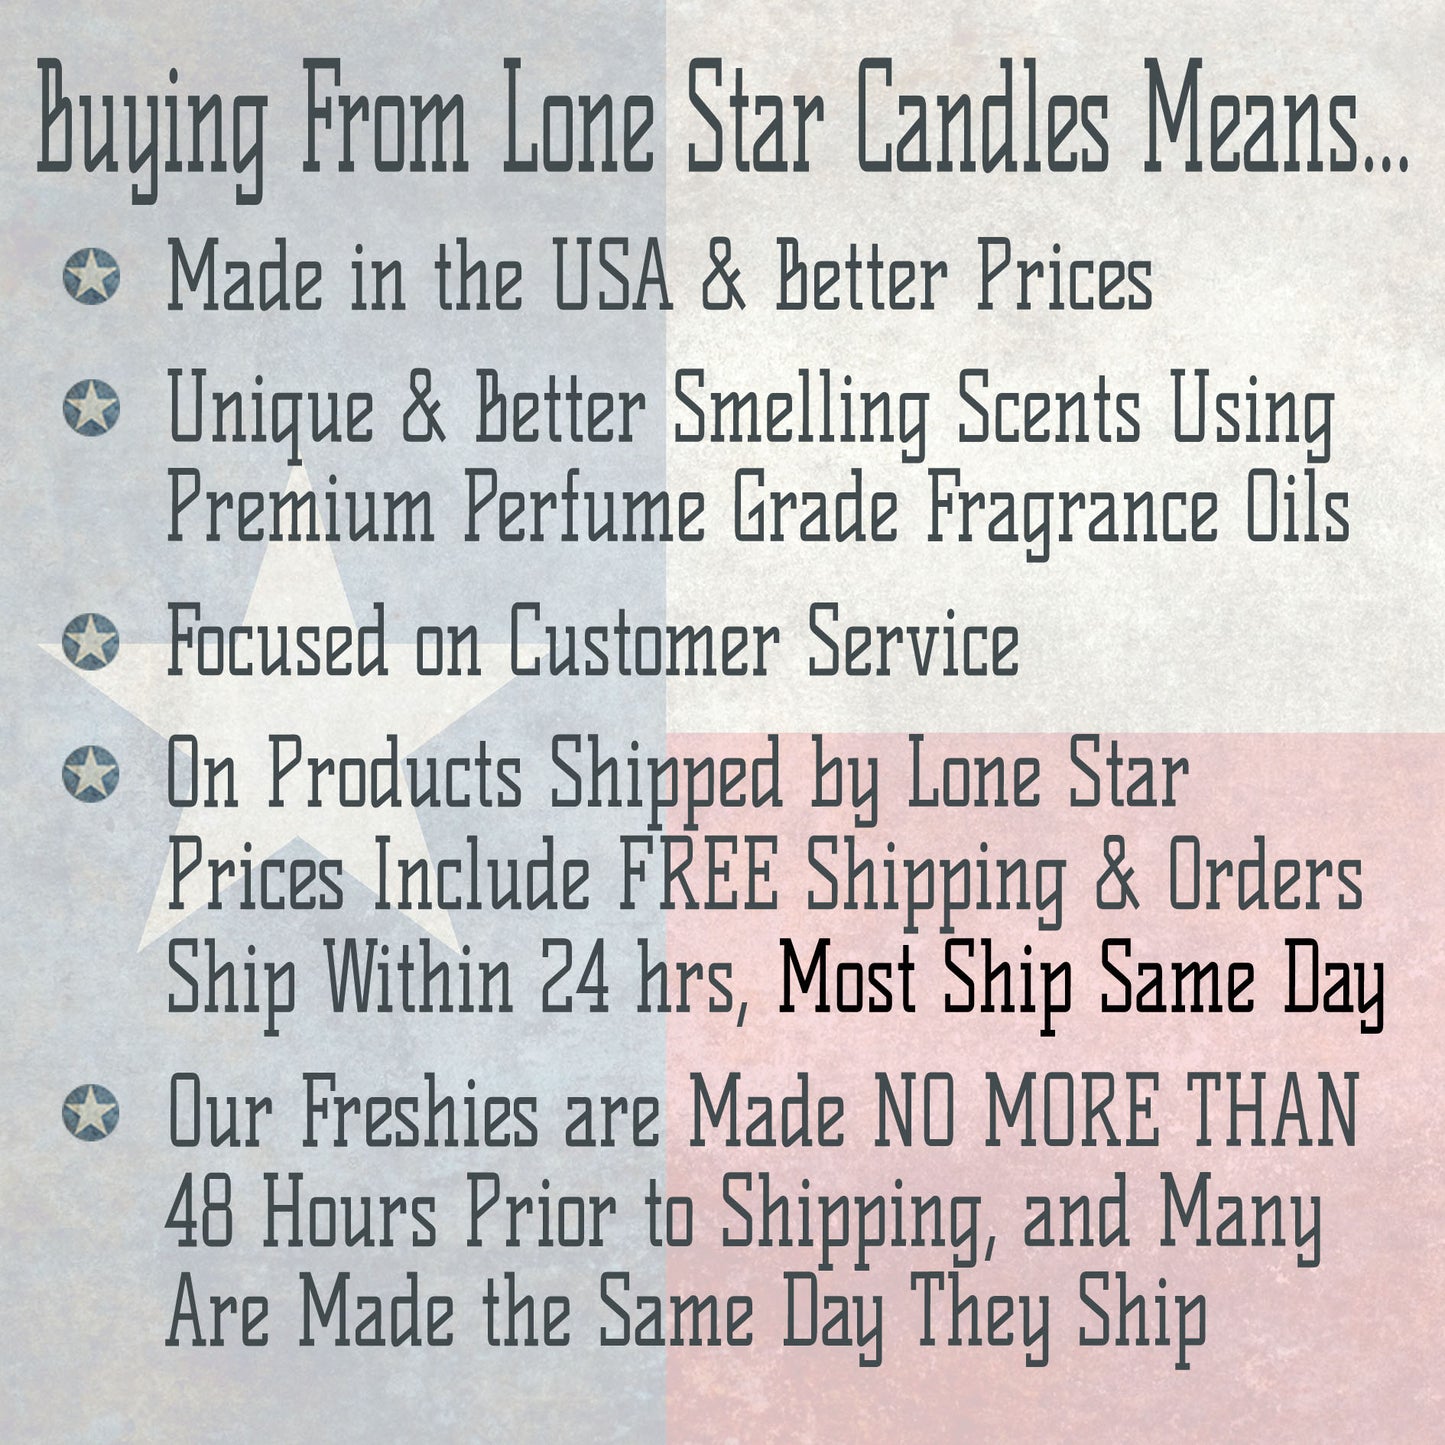 Strawberry Leather, Lone Star Candles & More's Premium Strongly Scented Freshies, Genuine Leather Aroma with Sweet & Juicy Strawberries, Car & Air Freshener, USA & Texas Made, Chili Pepper 1-Pack